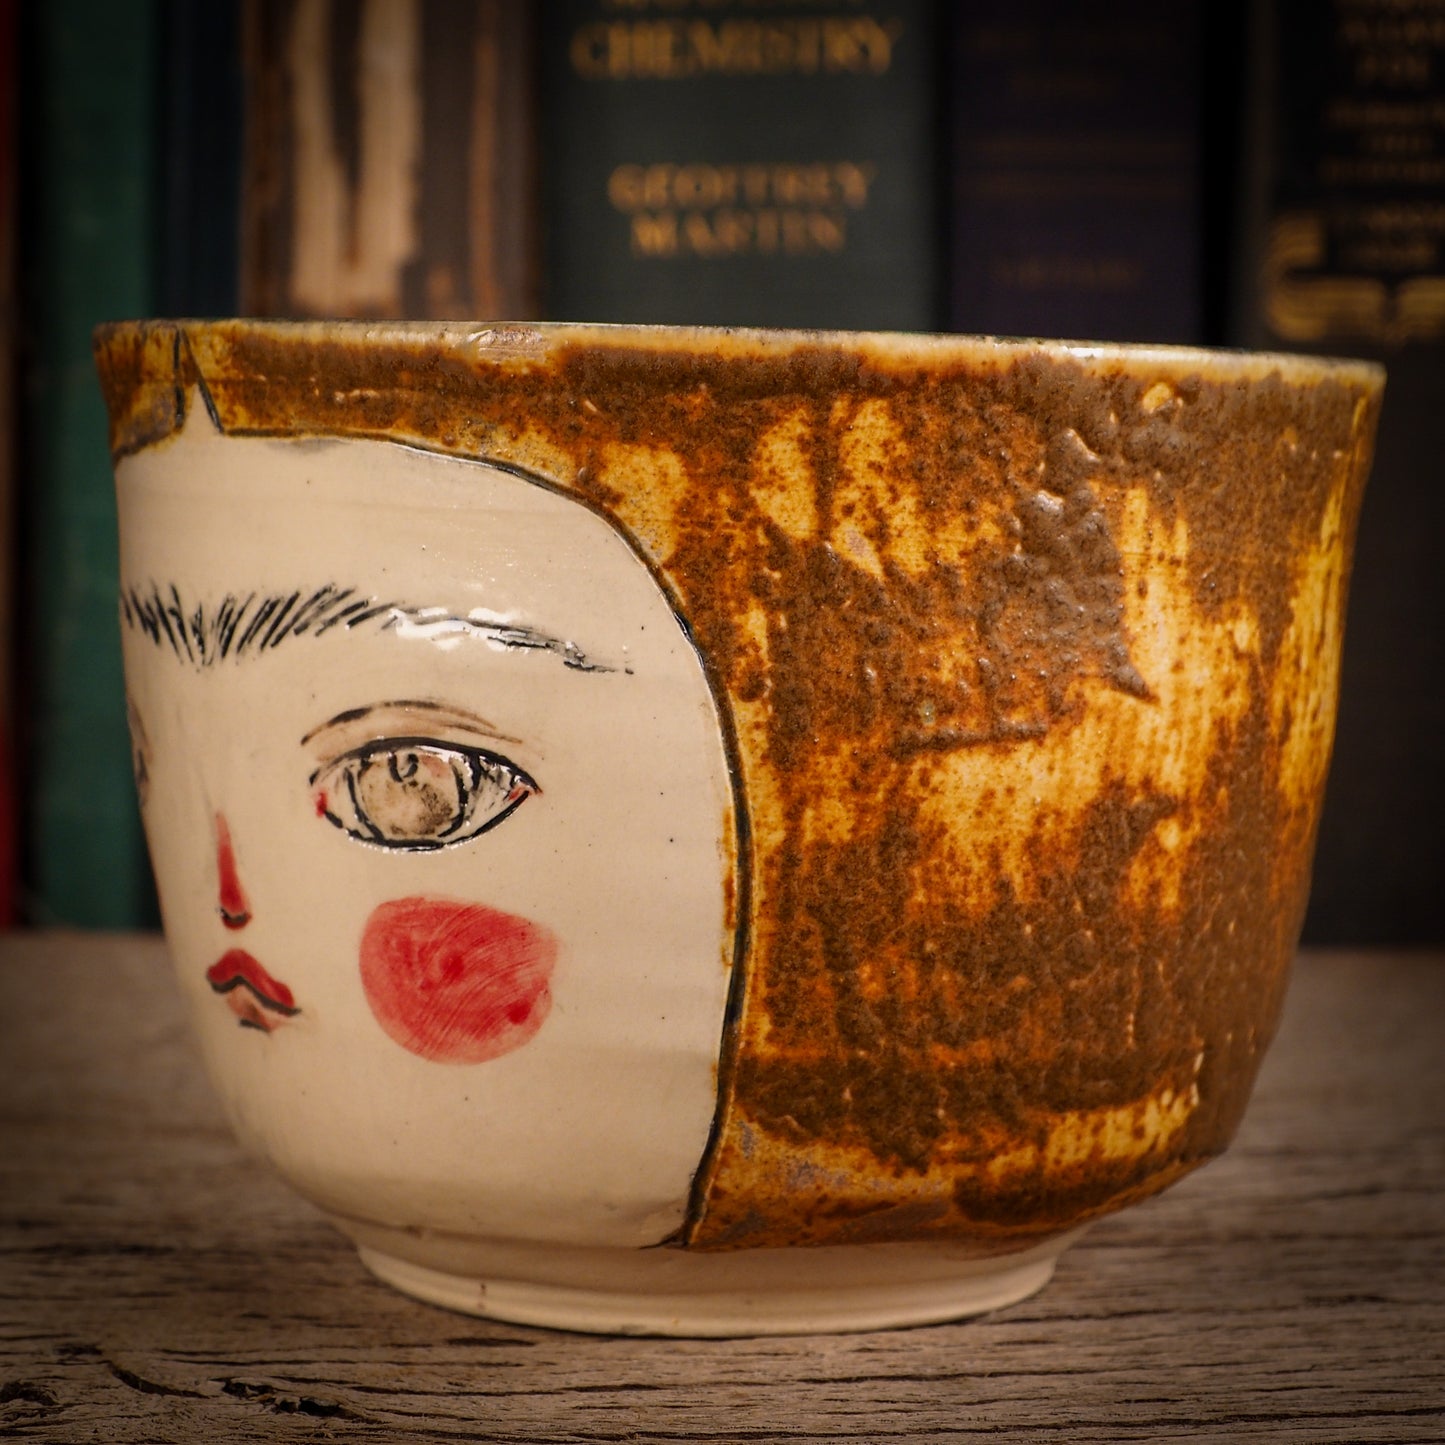  this is an original handmade glazed stoneware ceramic bowl by Idania Salcido the artist behind Danita Art, with Frida Kahlo hand sculpted on it, this is a unique and original home decoration one of a kind kitchenware piece.